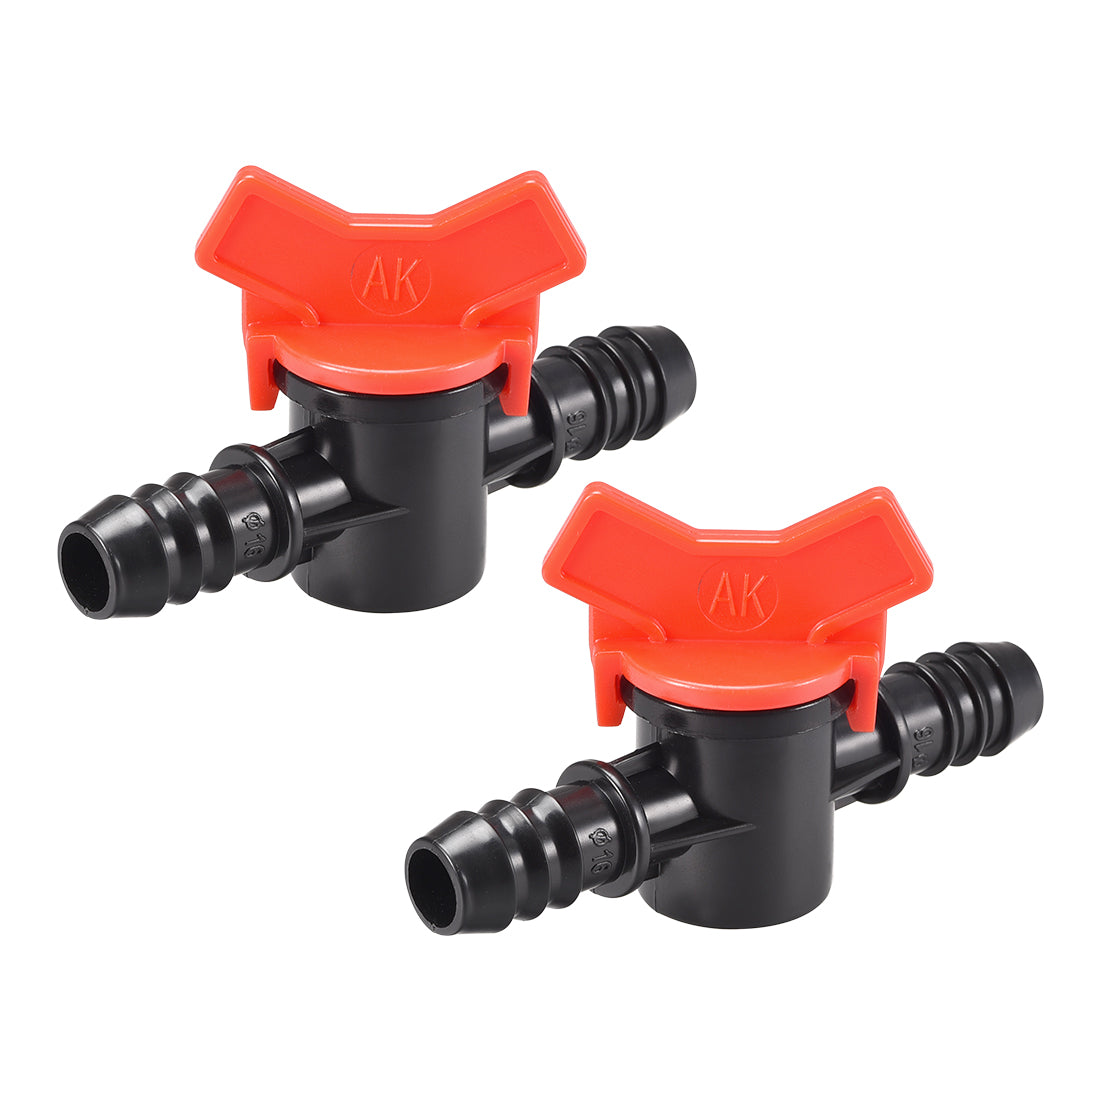 uxcell Uxcell Drip Irrigation Barbed Valve  for 1/2 Inch Double Male Barbed Valve Aquarium Water Flow Control Plastic Valve 2pcs